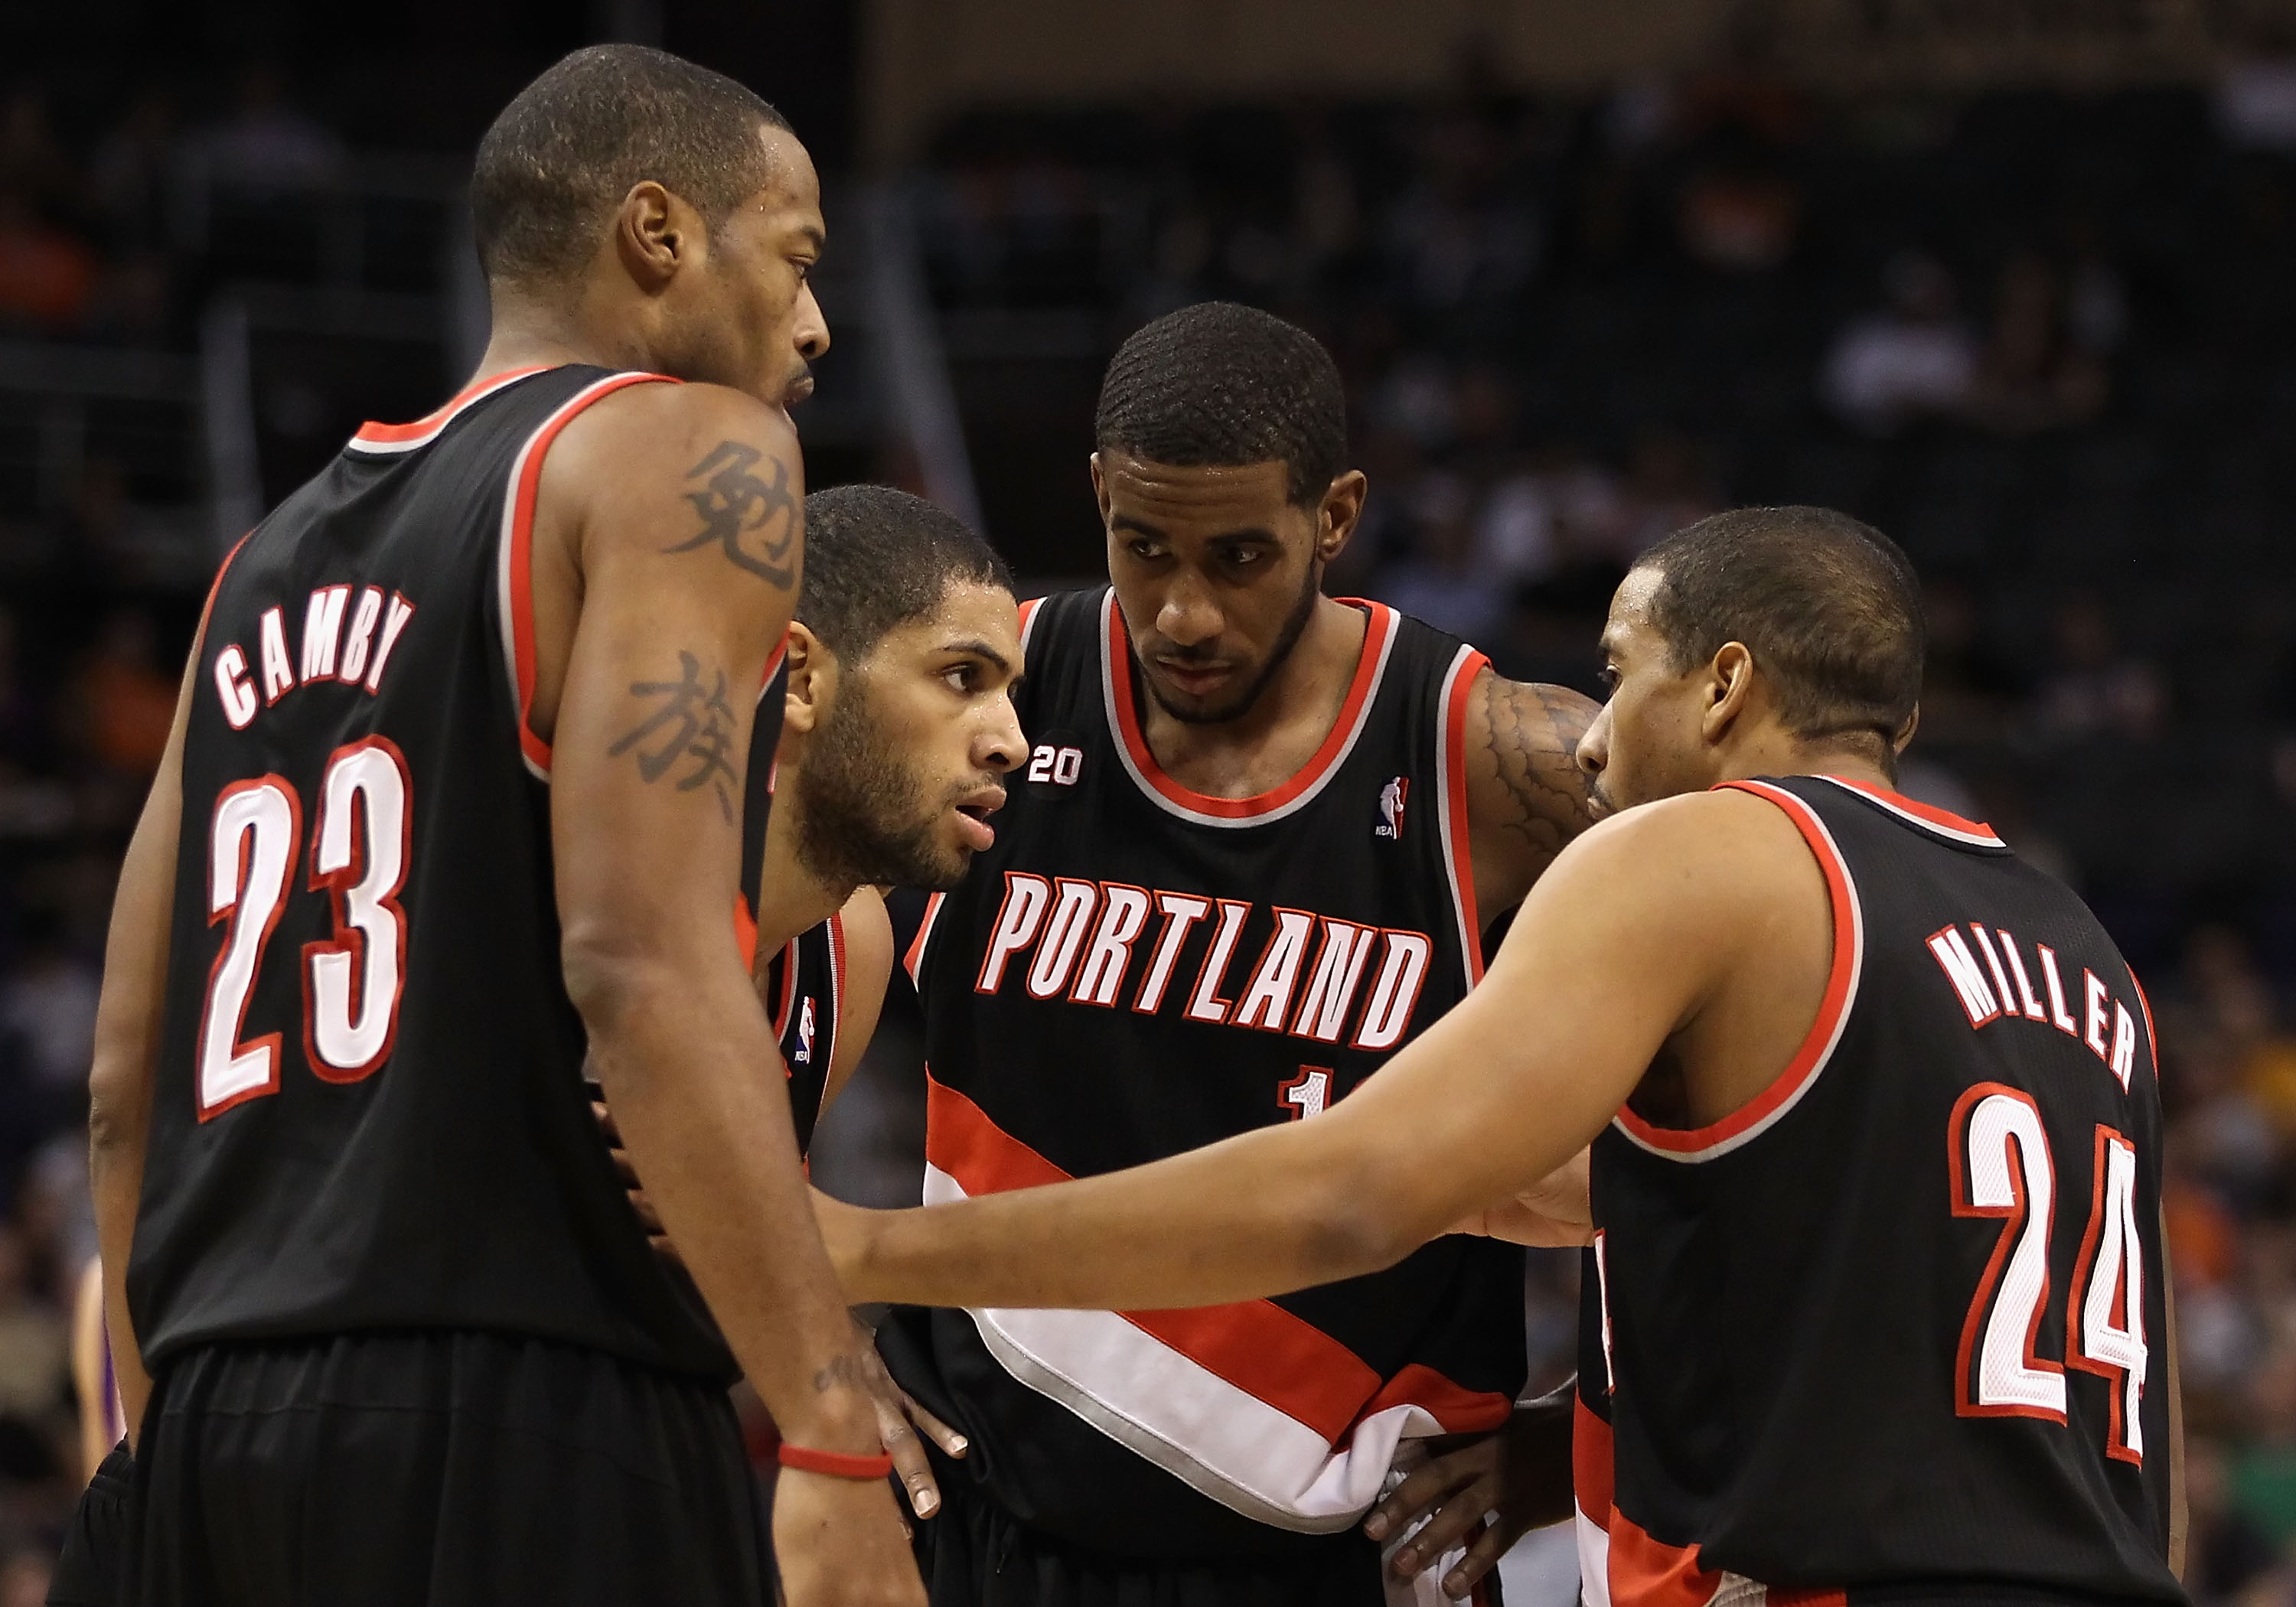 PHOENIX, AZ - JANUARY 14: (L-R) Marcus Camby #23, Nicolas Batum #88, LaMarcus Aldridge #12 and Andre Miller #24 of the Portland Trail Blazers huddle up during the NBA game against the Phoenix Suns at US Airways Center on January 14, 2011 in Phoenix, Arizo